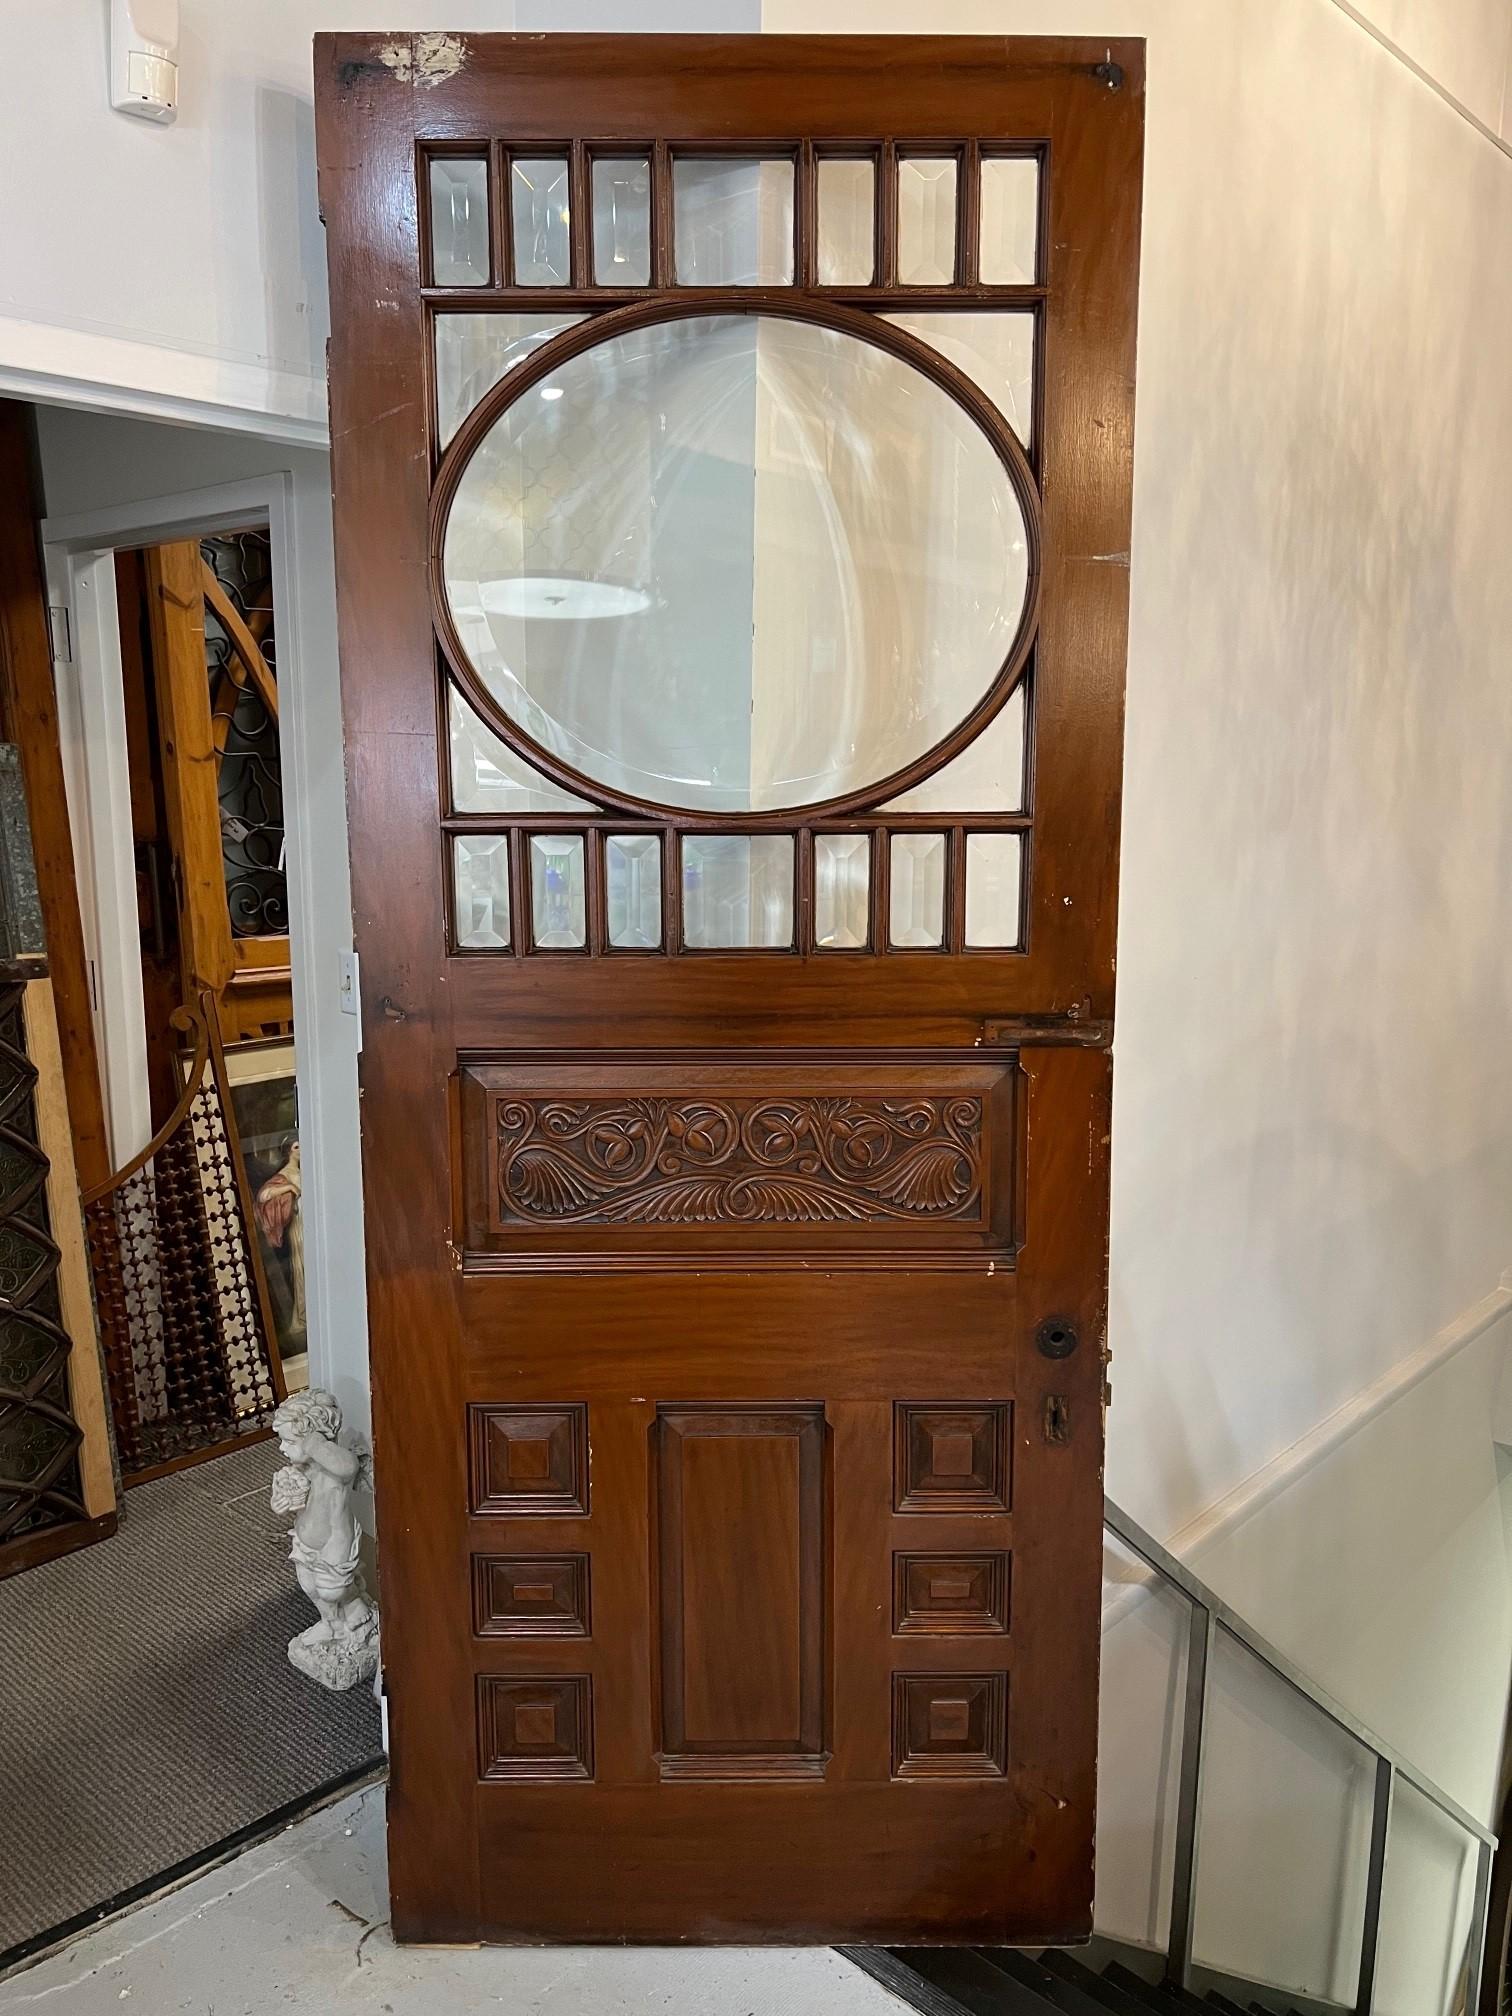 Beautiful mahogany oversized entrance door with beveled glass and a carved wood panel. The oval window with its wide cut beveled glass and the smaller panels make it look amazing in the sunlight. Its also a great size for a grand entrance or used as